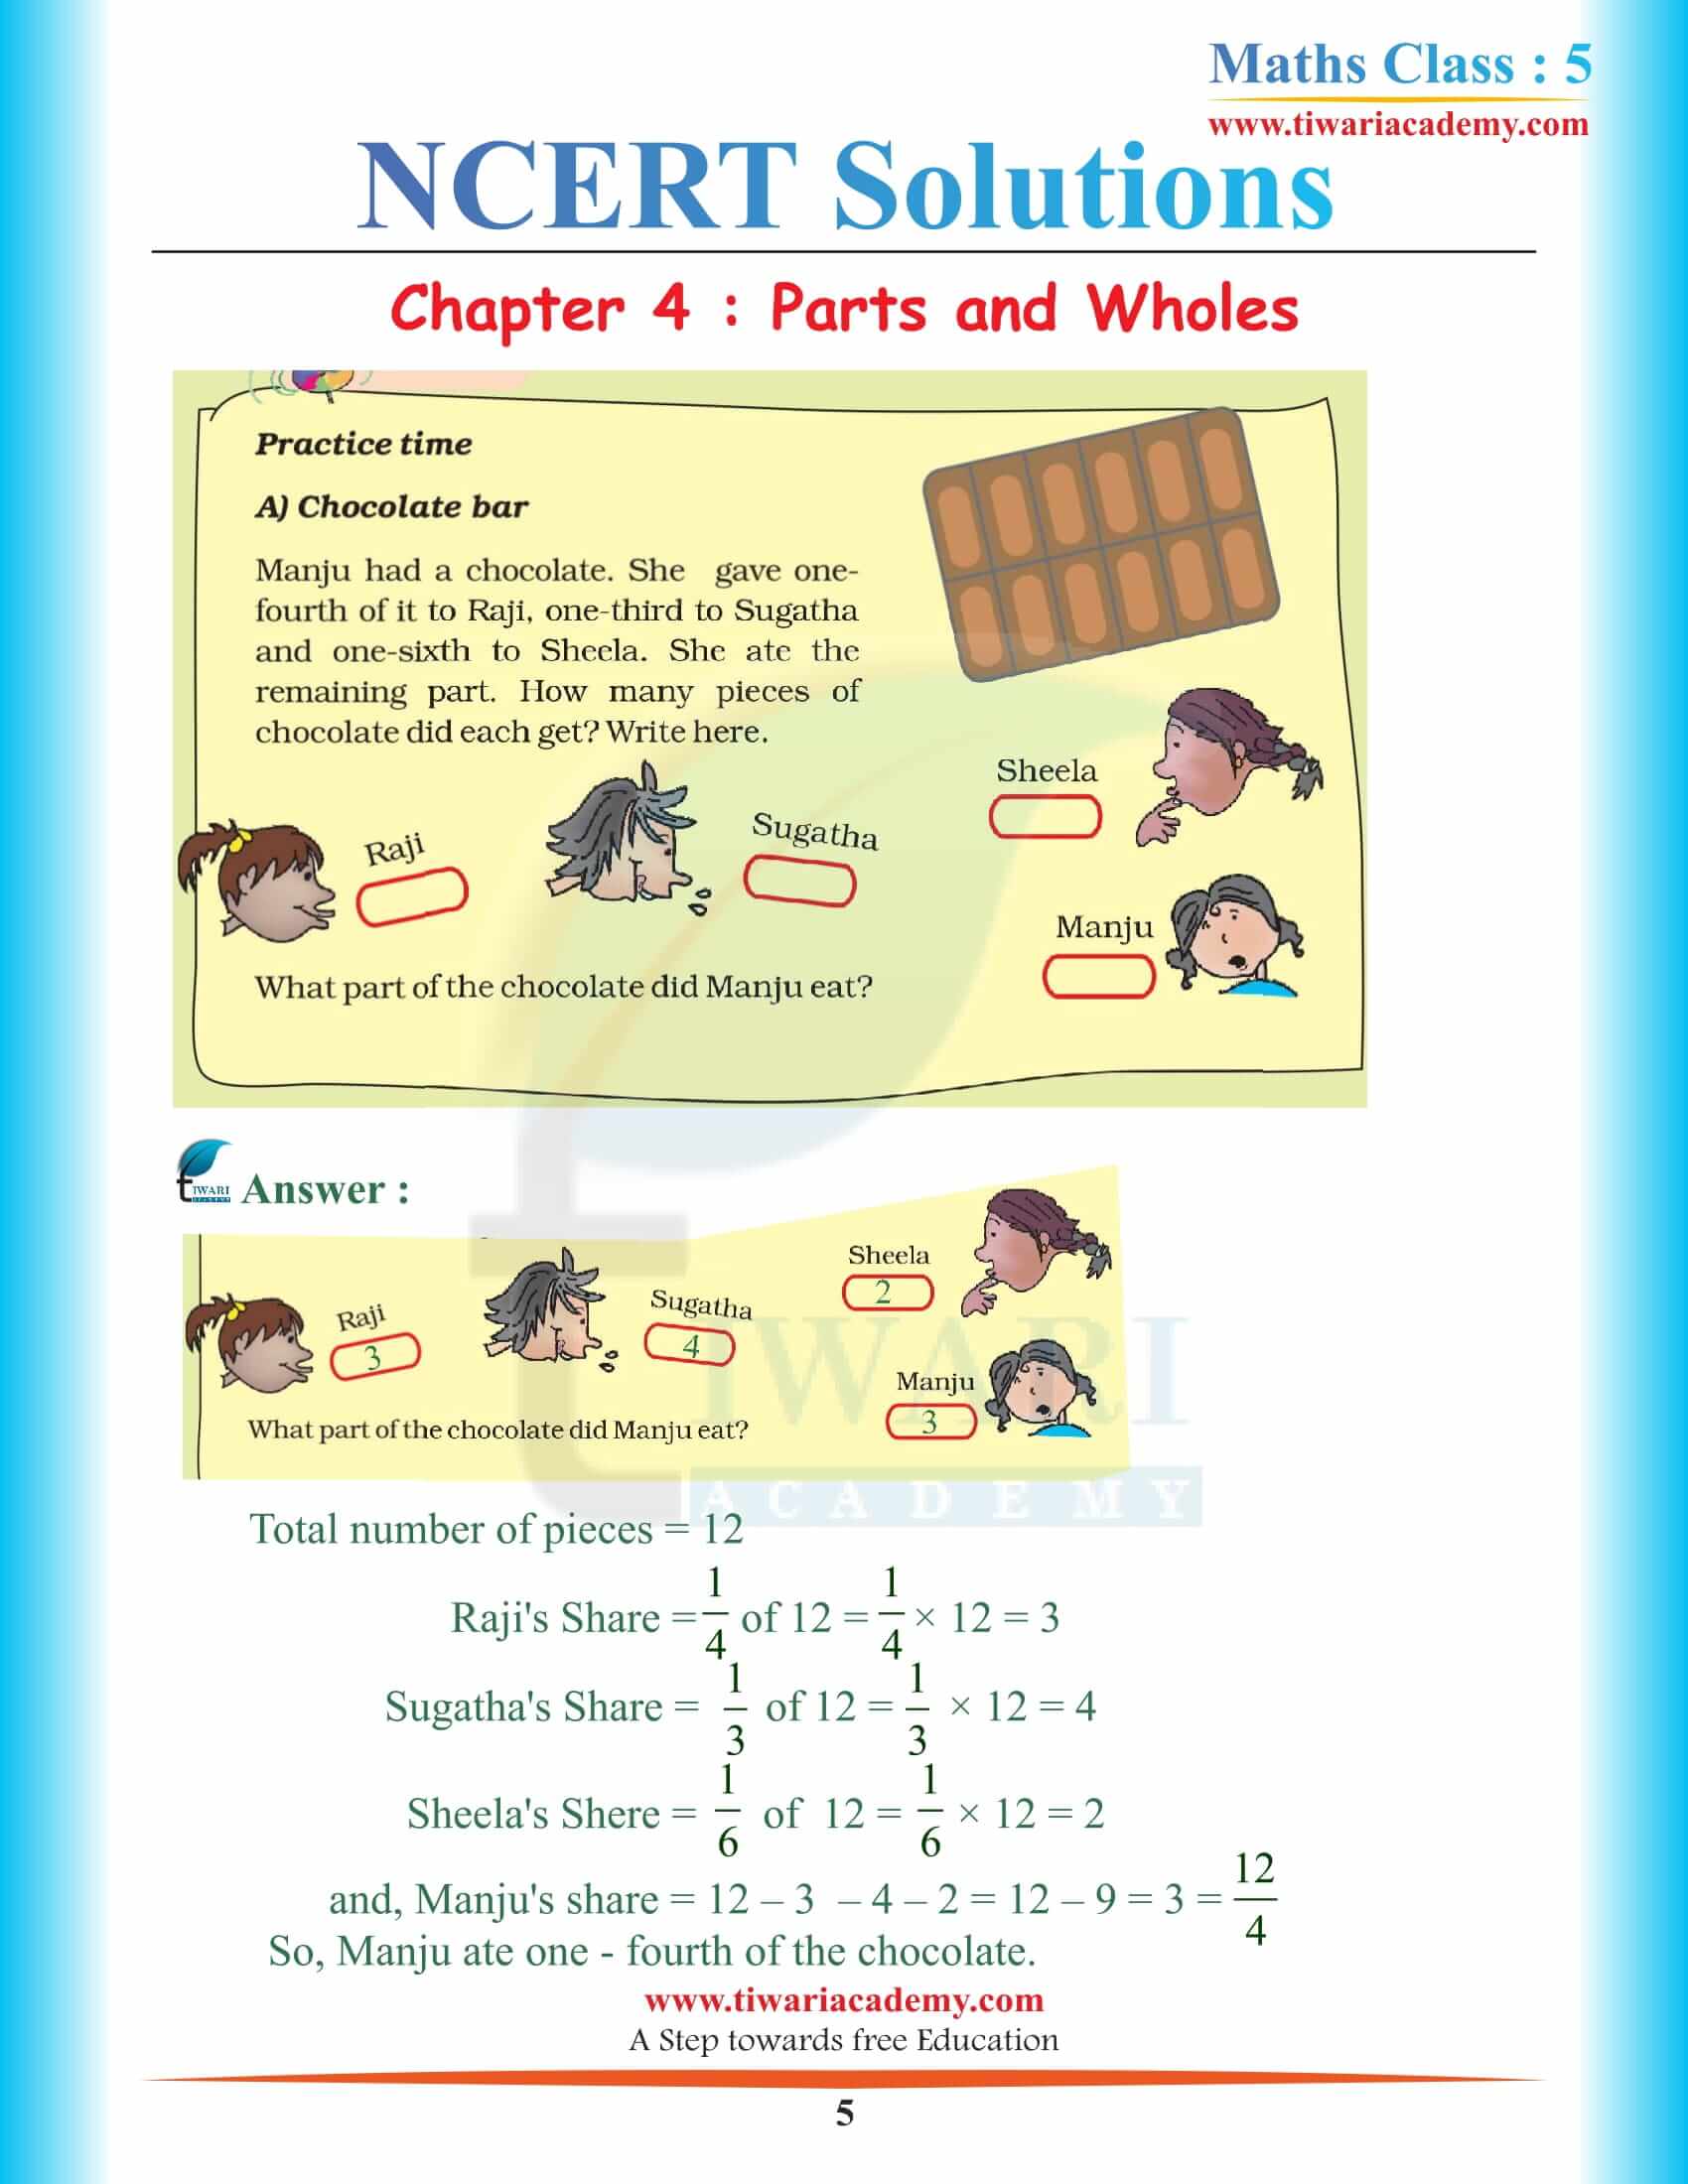 NCERT Solutions for Class 5 Maths Chapter 4 guide